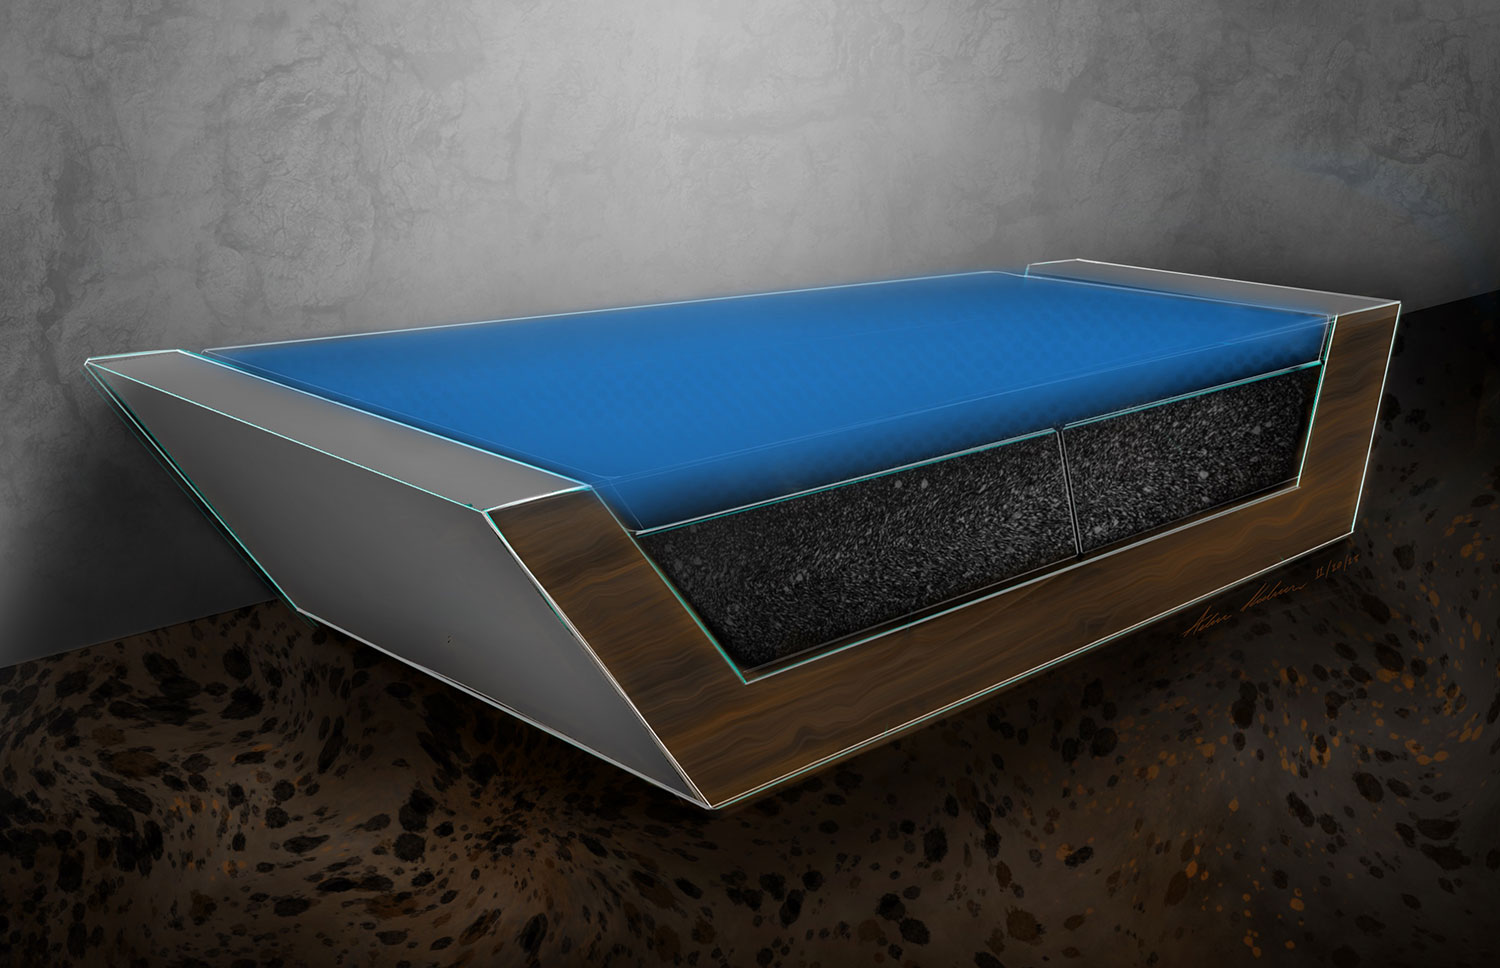 concept sketch of a bench with a blue top.